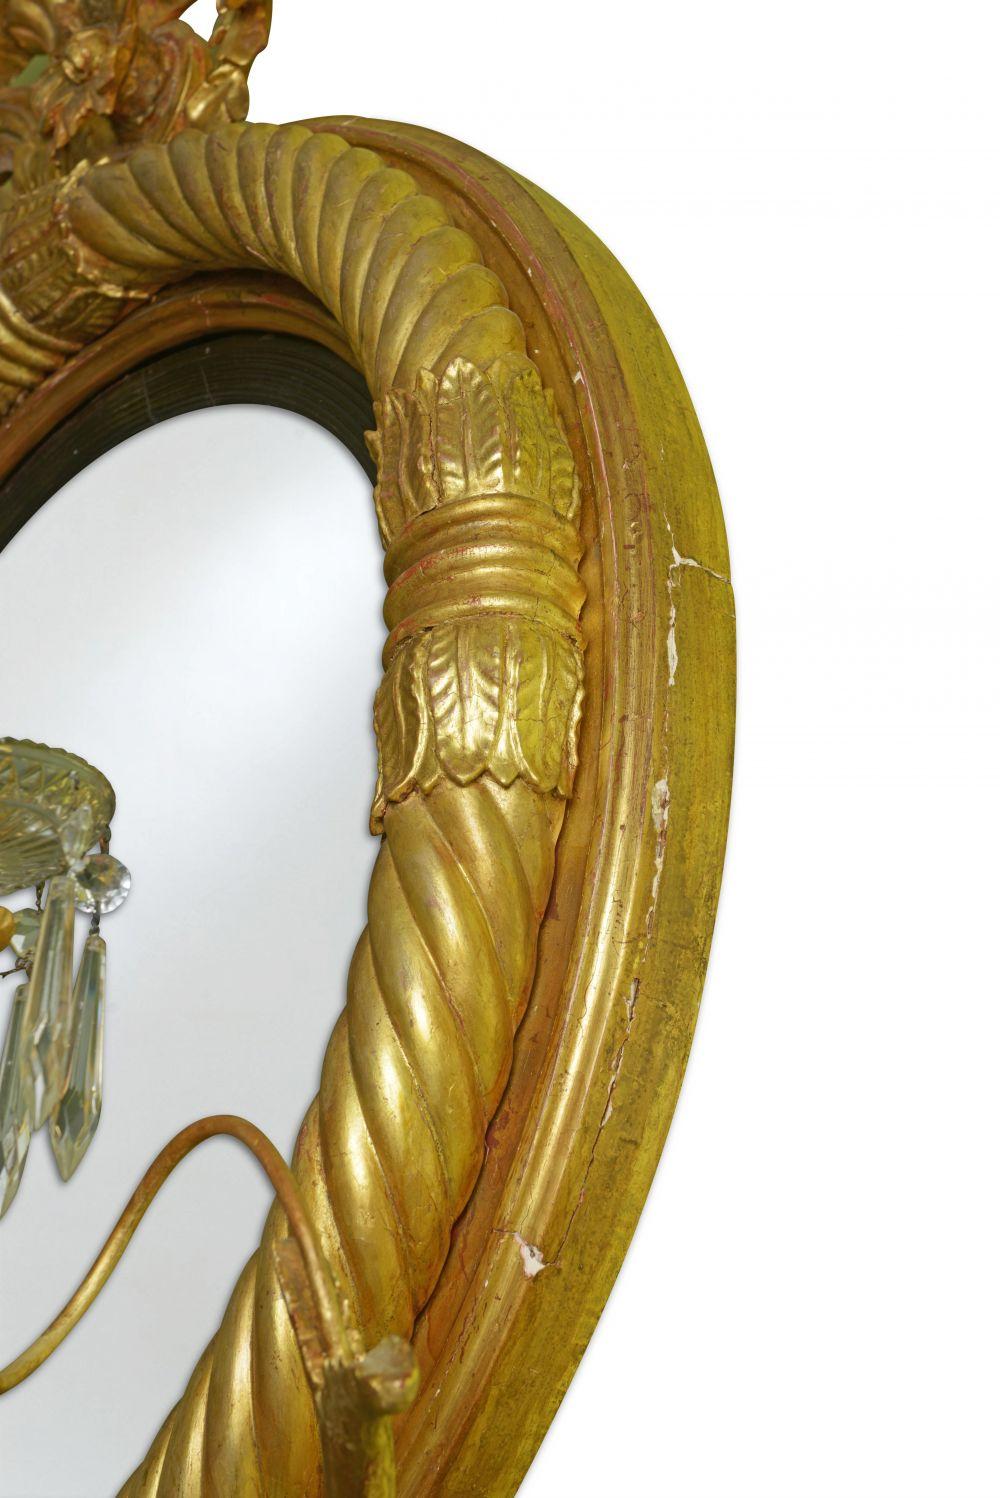 The convex mirror plate within an ebonies reeded surround and spiral reeded frame with lotus-leaf clasps; surmounted by a pair of addorsed dolphins on a rockwork plinth flanked by scrolling foliage; Issuing four outscrolled candlearms with glass